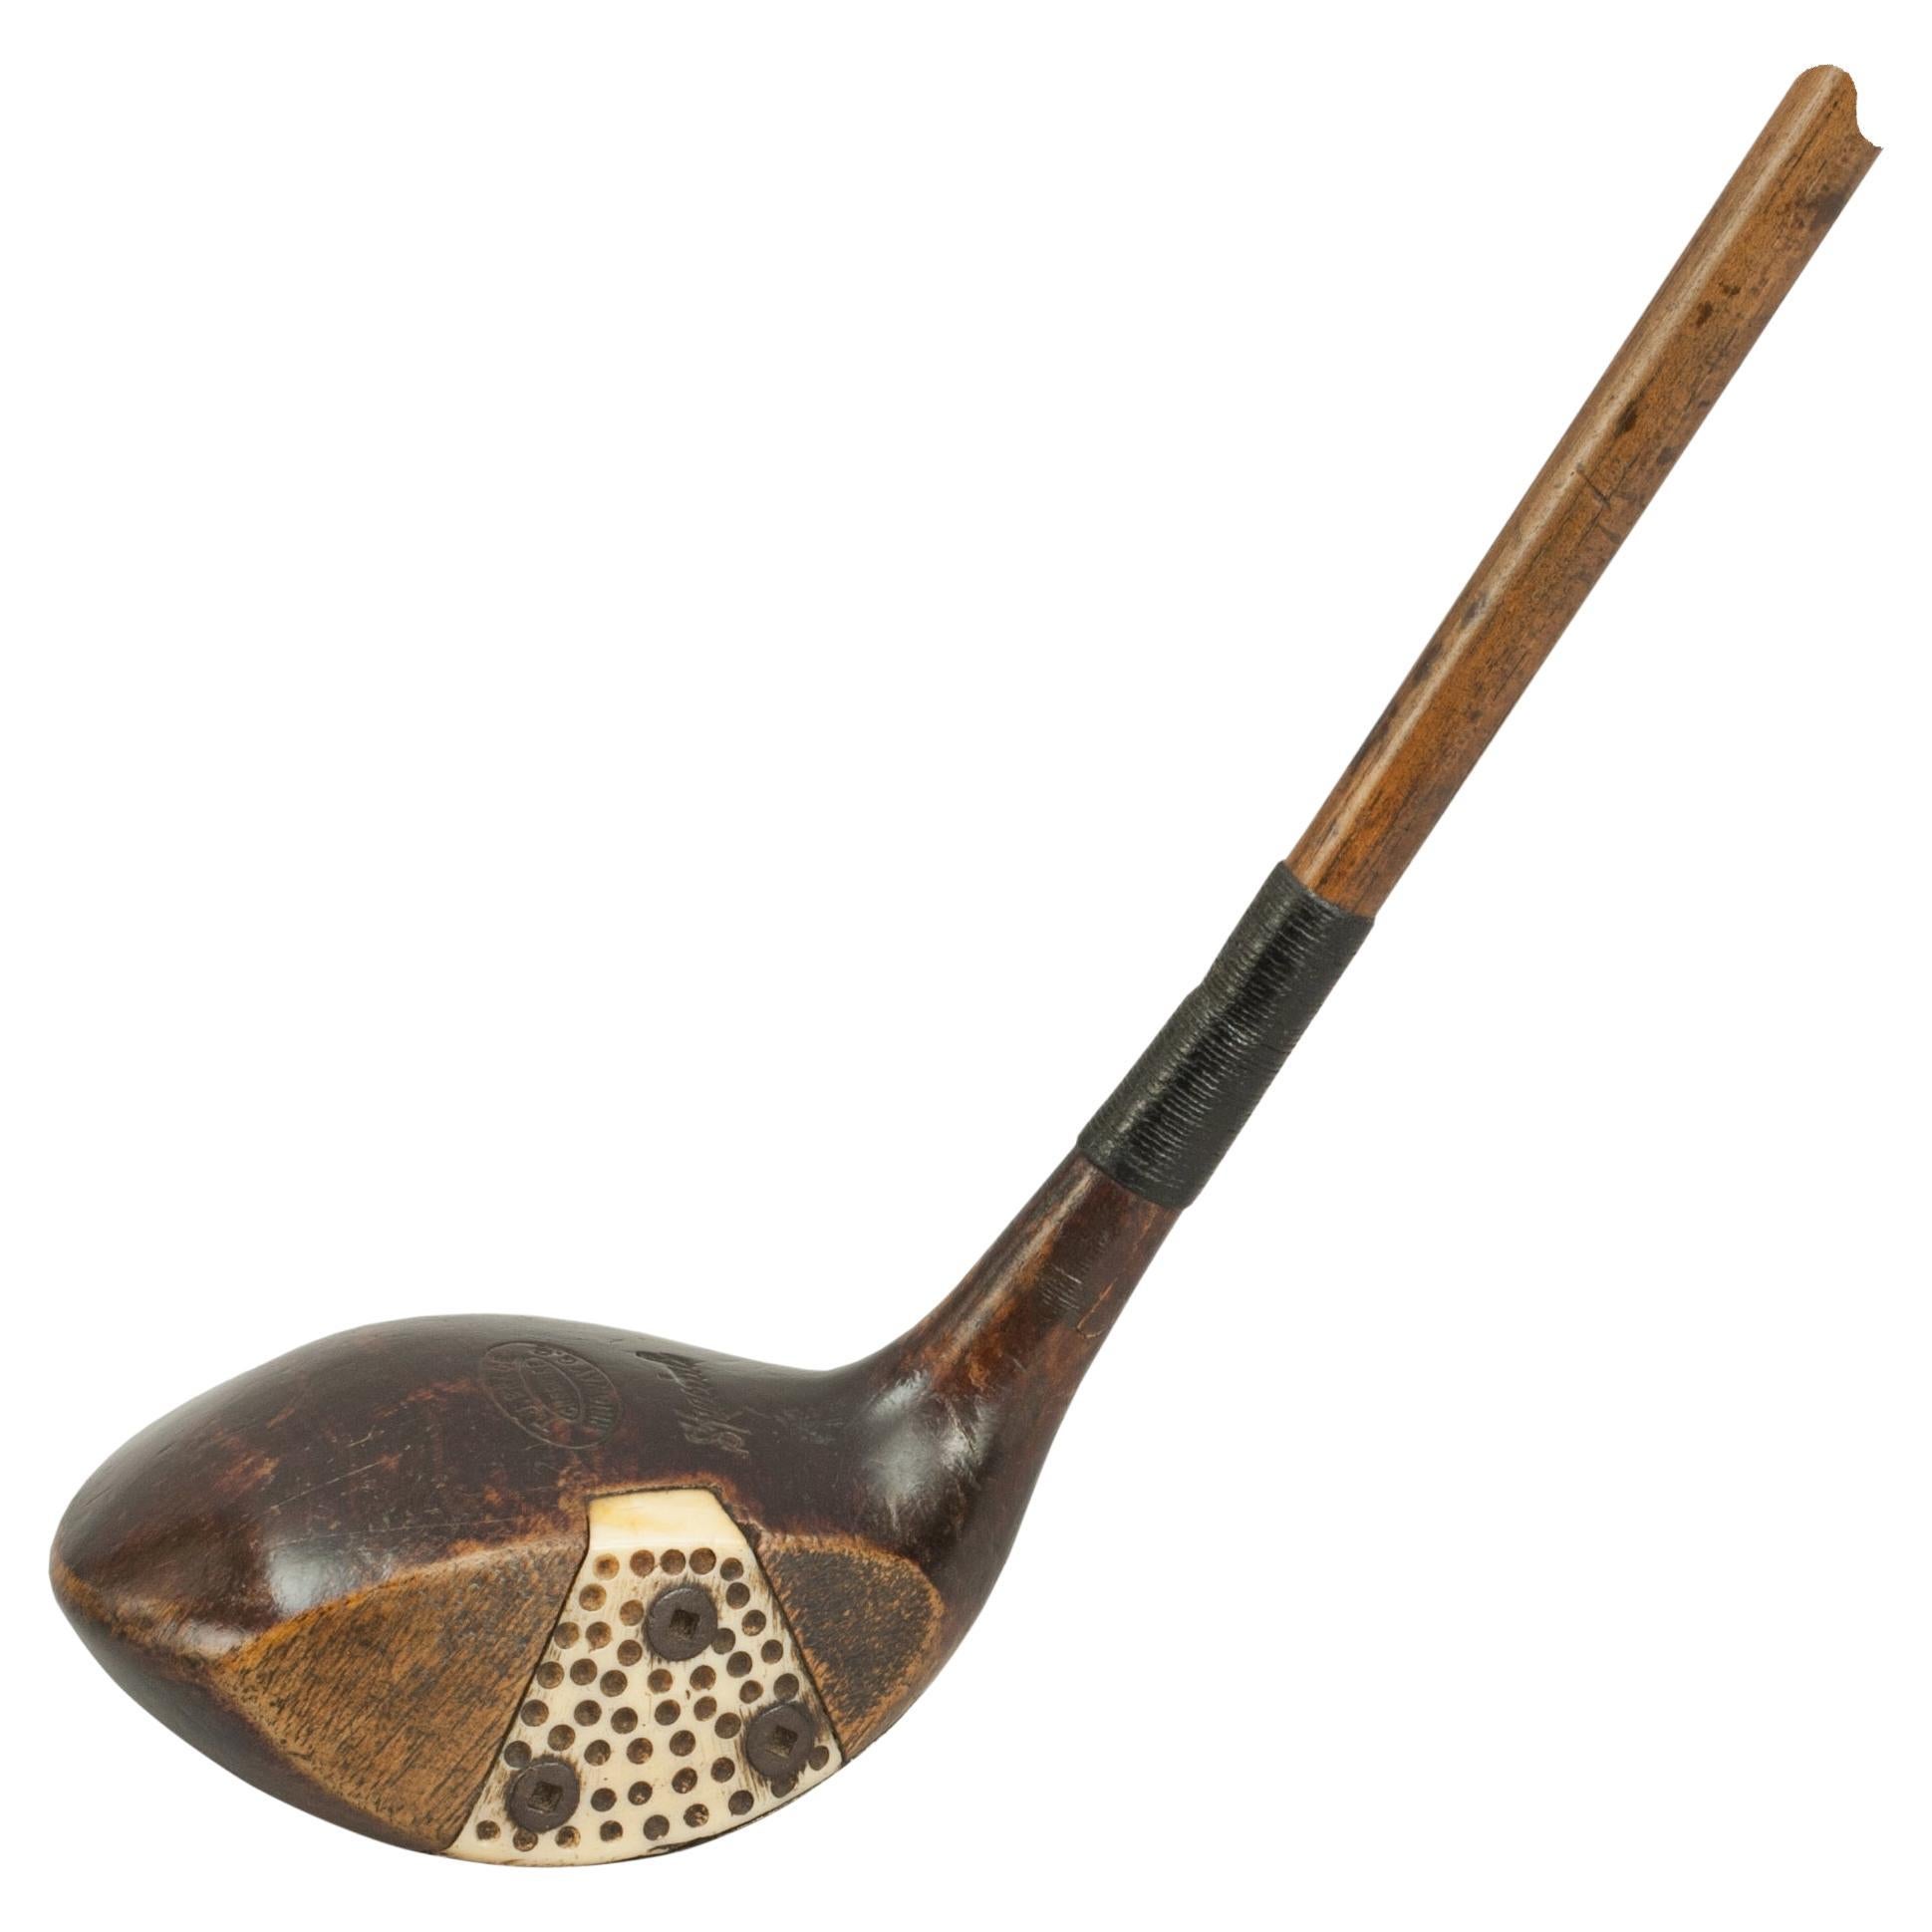 Antique Golf Club, Hickory Wood with Fancy Face